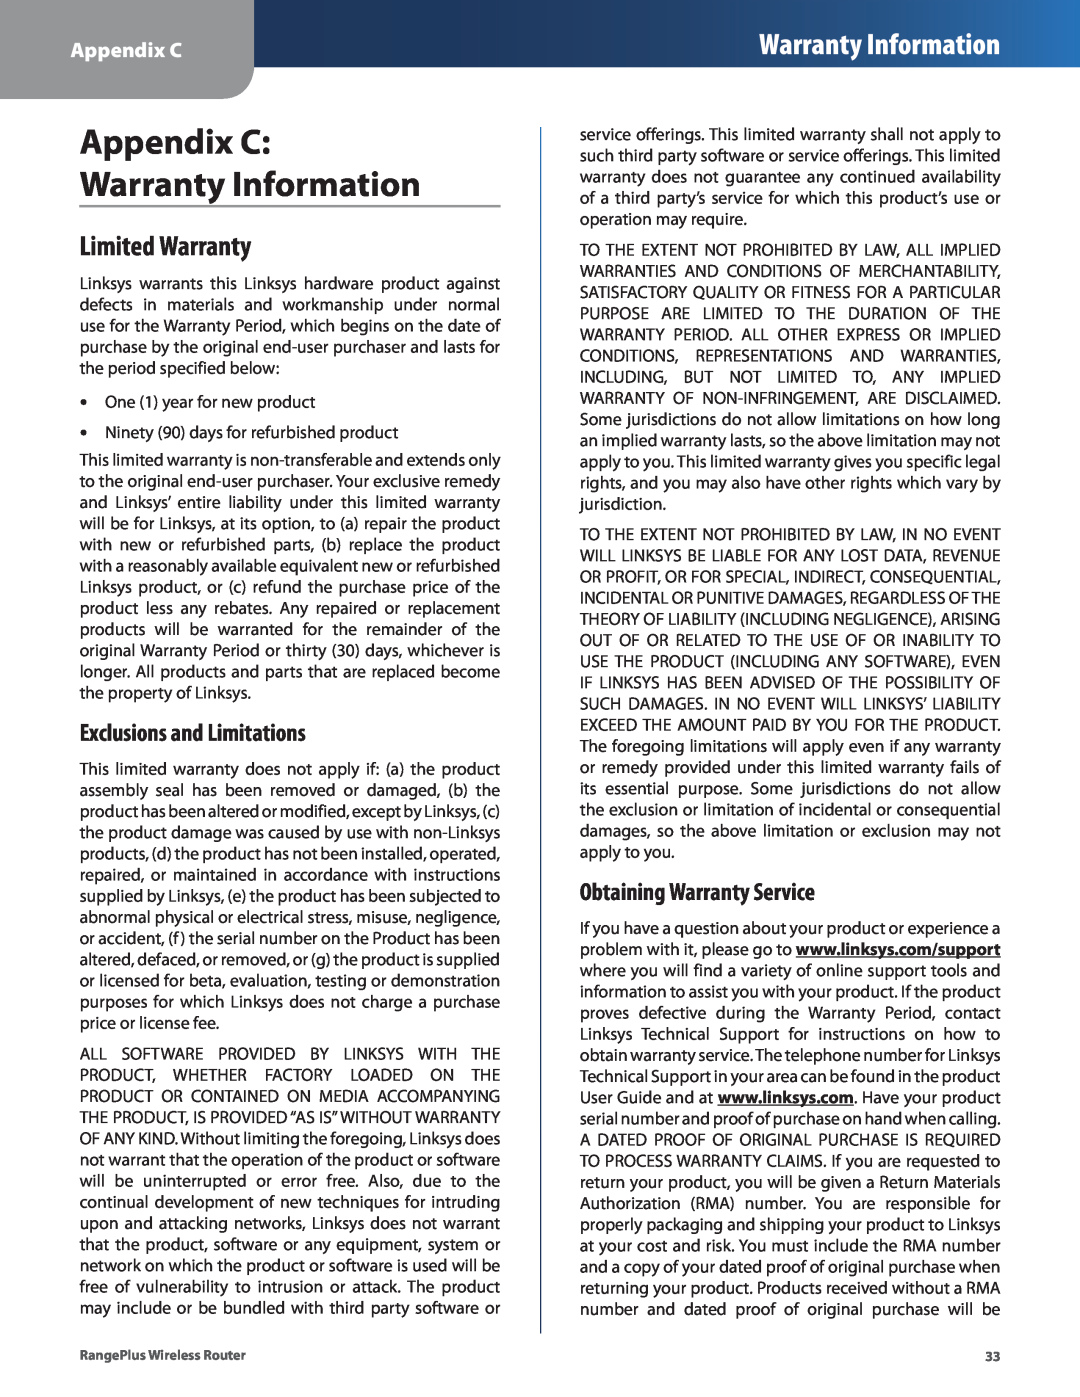 Cisco Systems WRT110 manual Appendix C Warranty Information, Limited Warranty, Exclusions and Limitations 